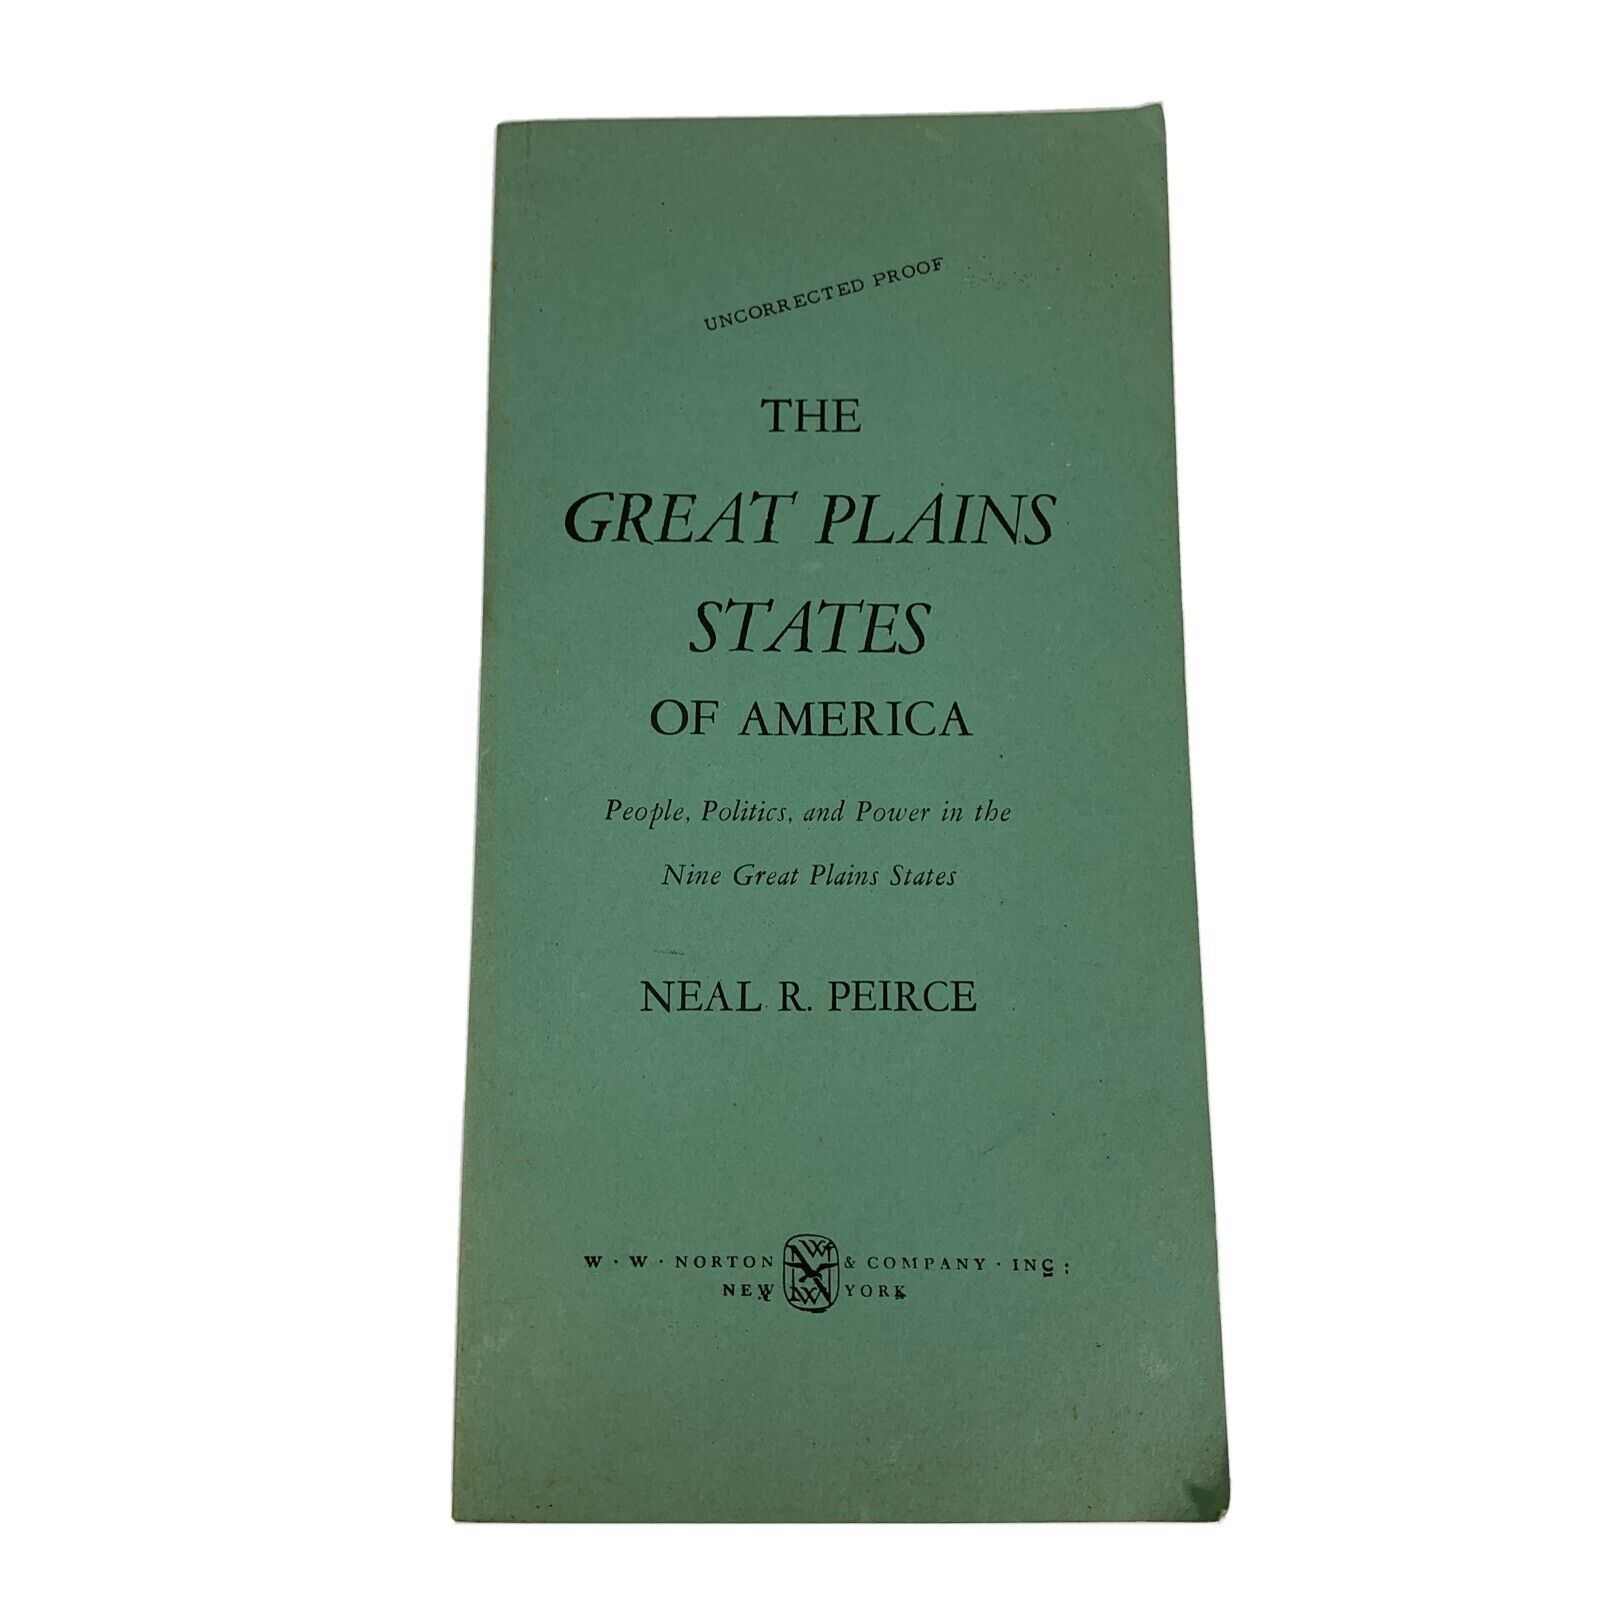 Great Plains States of America: People, Politics, and Power - UNCORRECTED PROOF